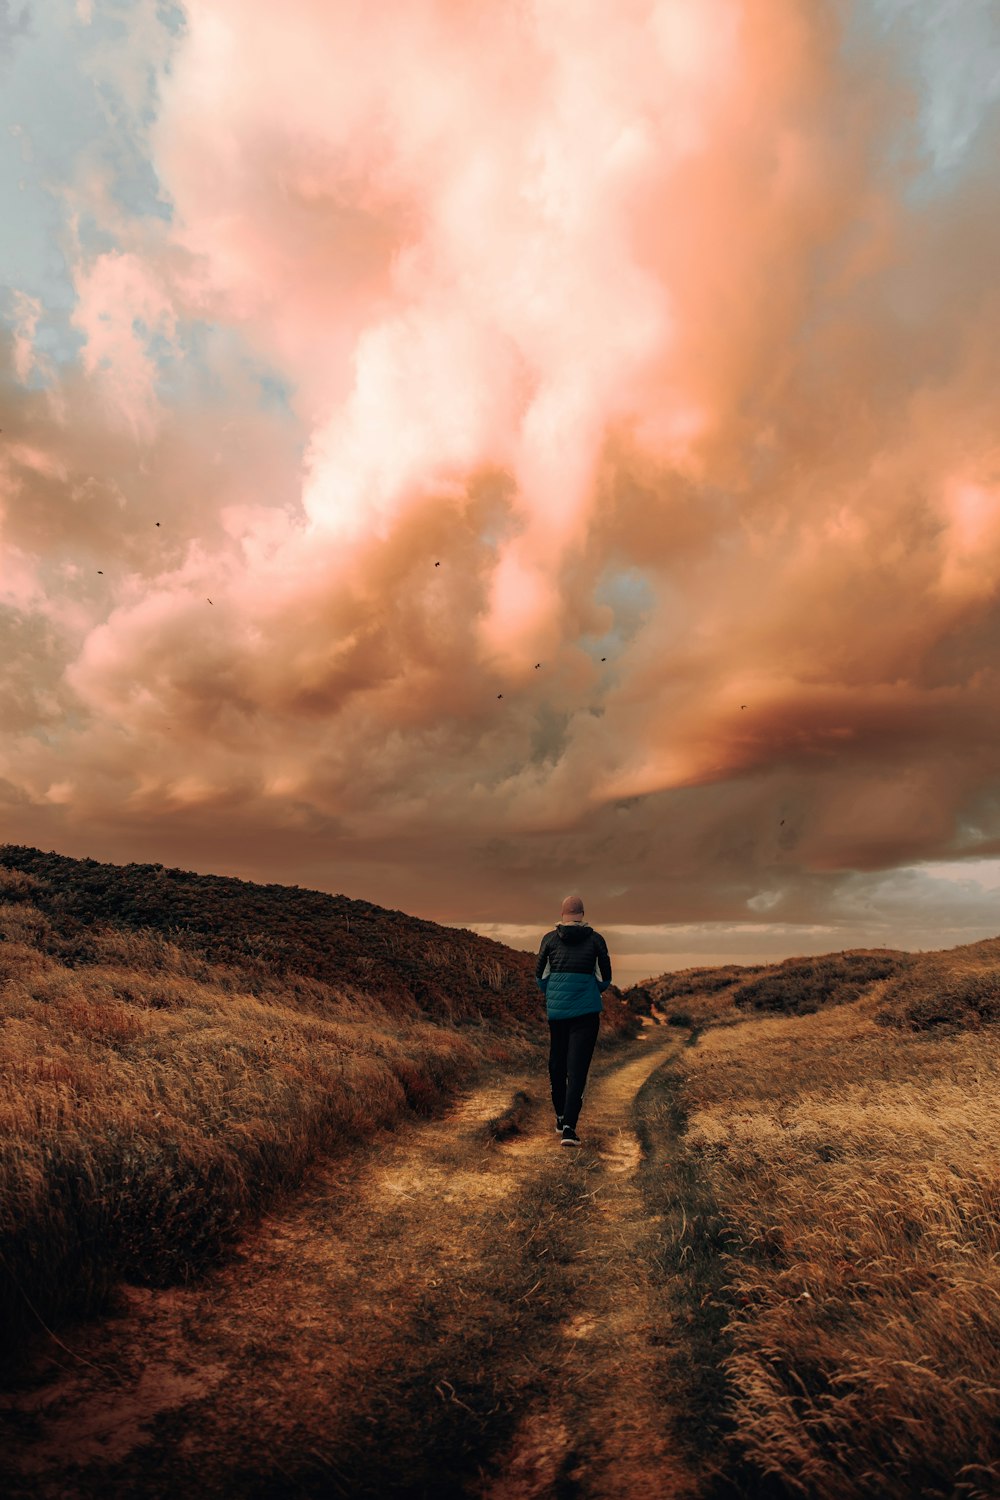 a person walking down a dirt road under a cloudy sky